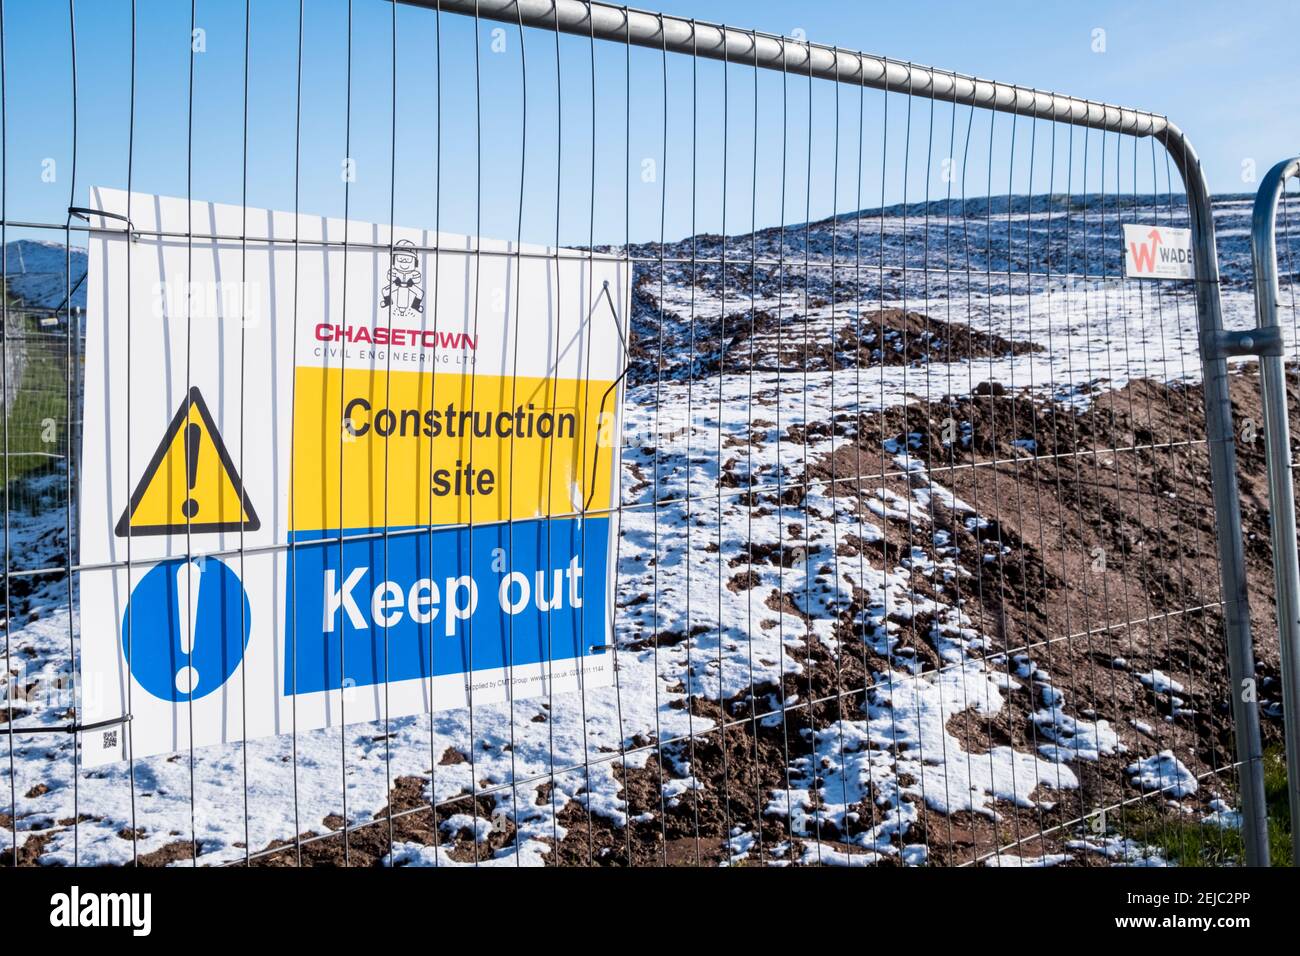 Security fencing and a Keep Out sign at a construction site where building work has not yet commenced. Nottinghamshire, England, UK Stock Photo